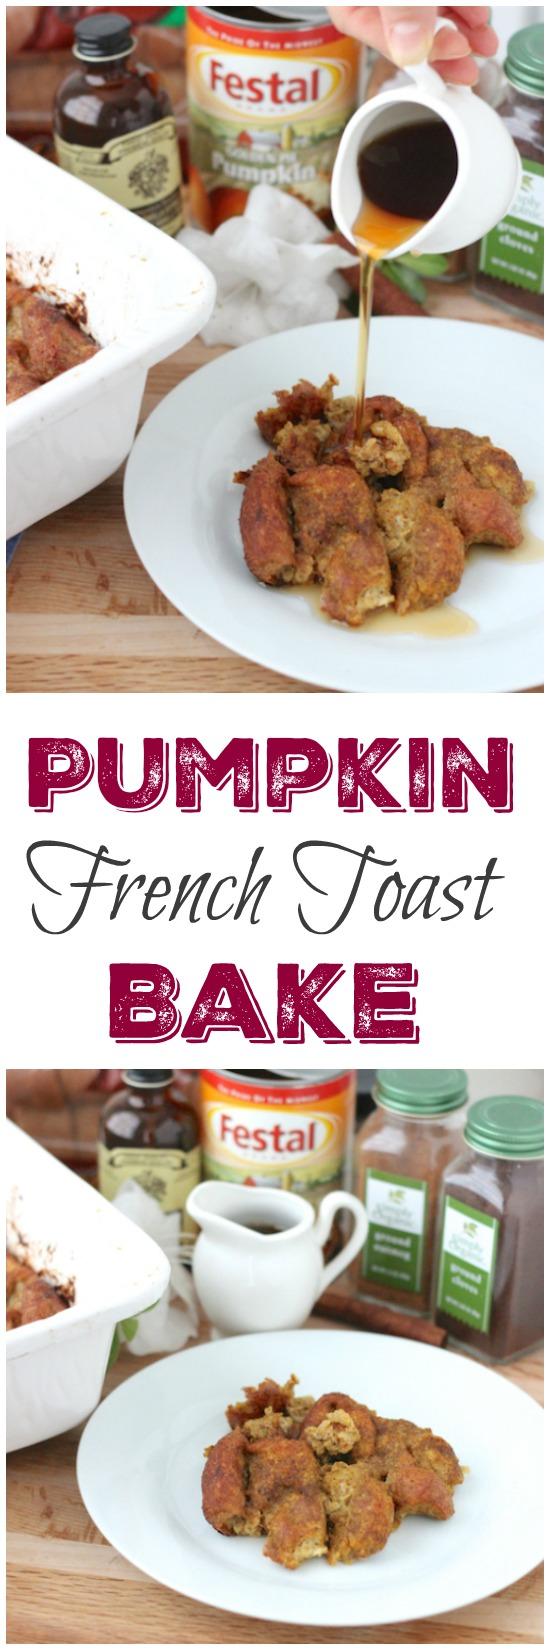 This Pumpkin French Toast Bake is a yummy, seasonal breakfast casserole that has all the deliciousness of french toast, but it's incredibly easy to make and feeds a crowd.